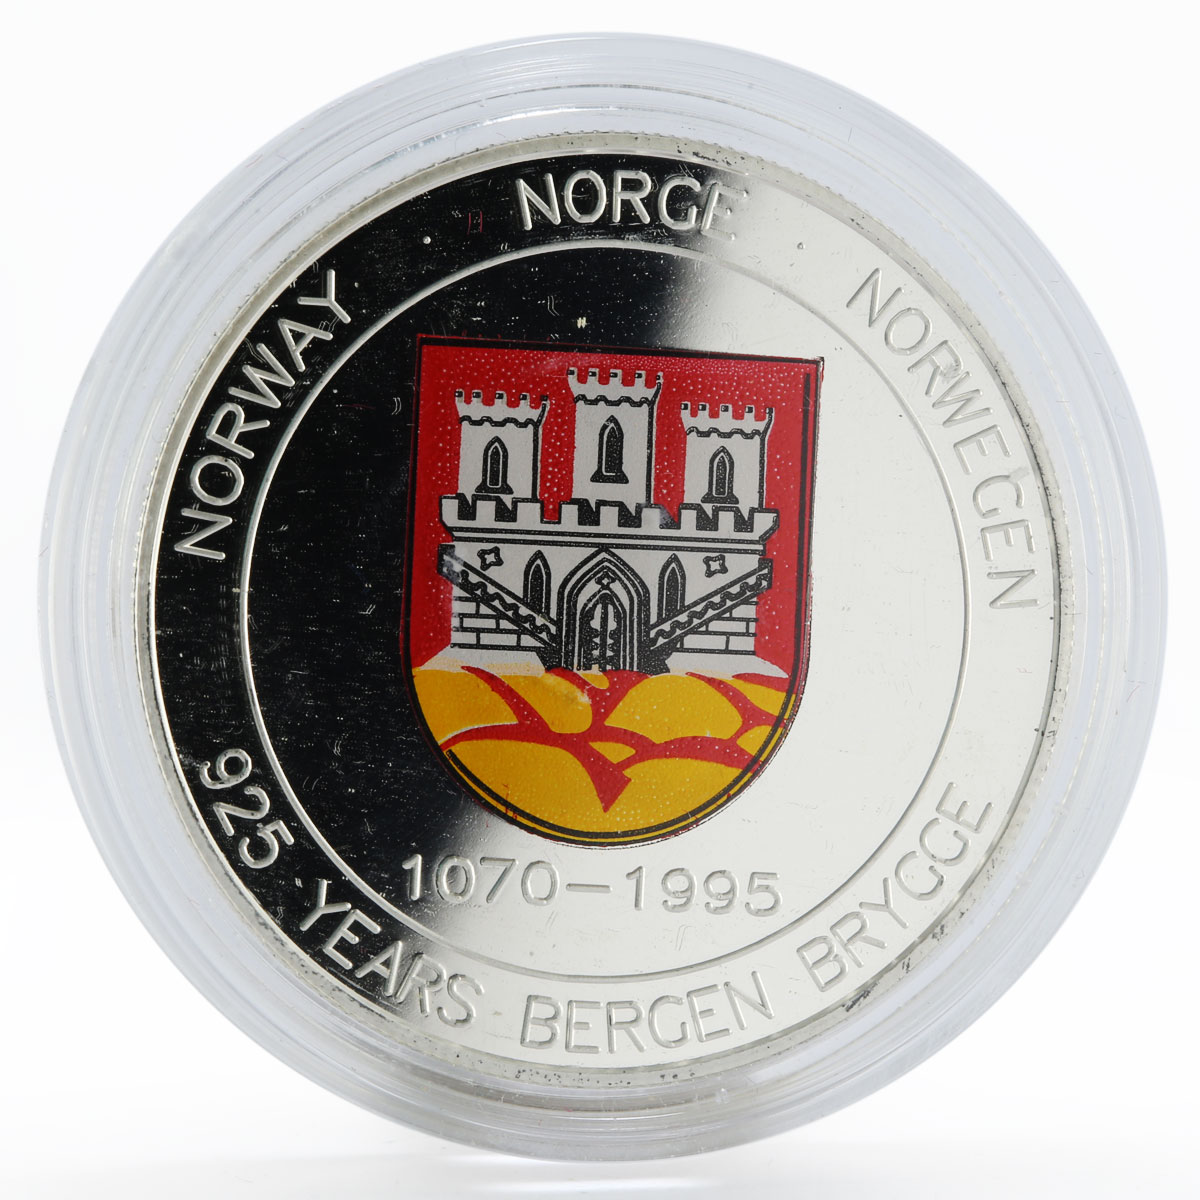 Norway 20 ECU 925 Years of Bergen Brygge Harald V proof silver coin 1994